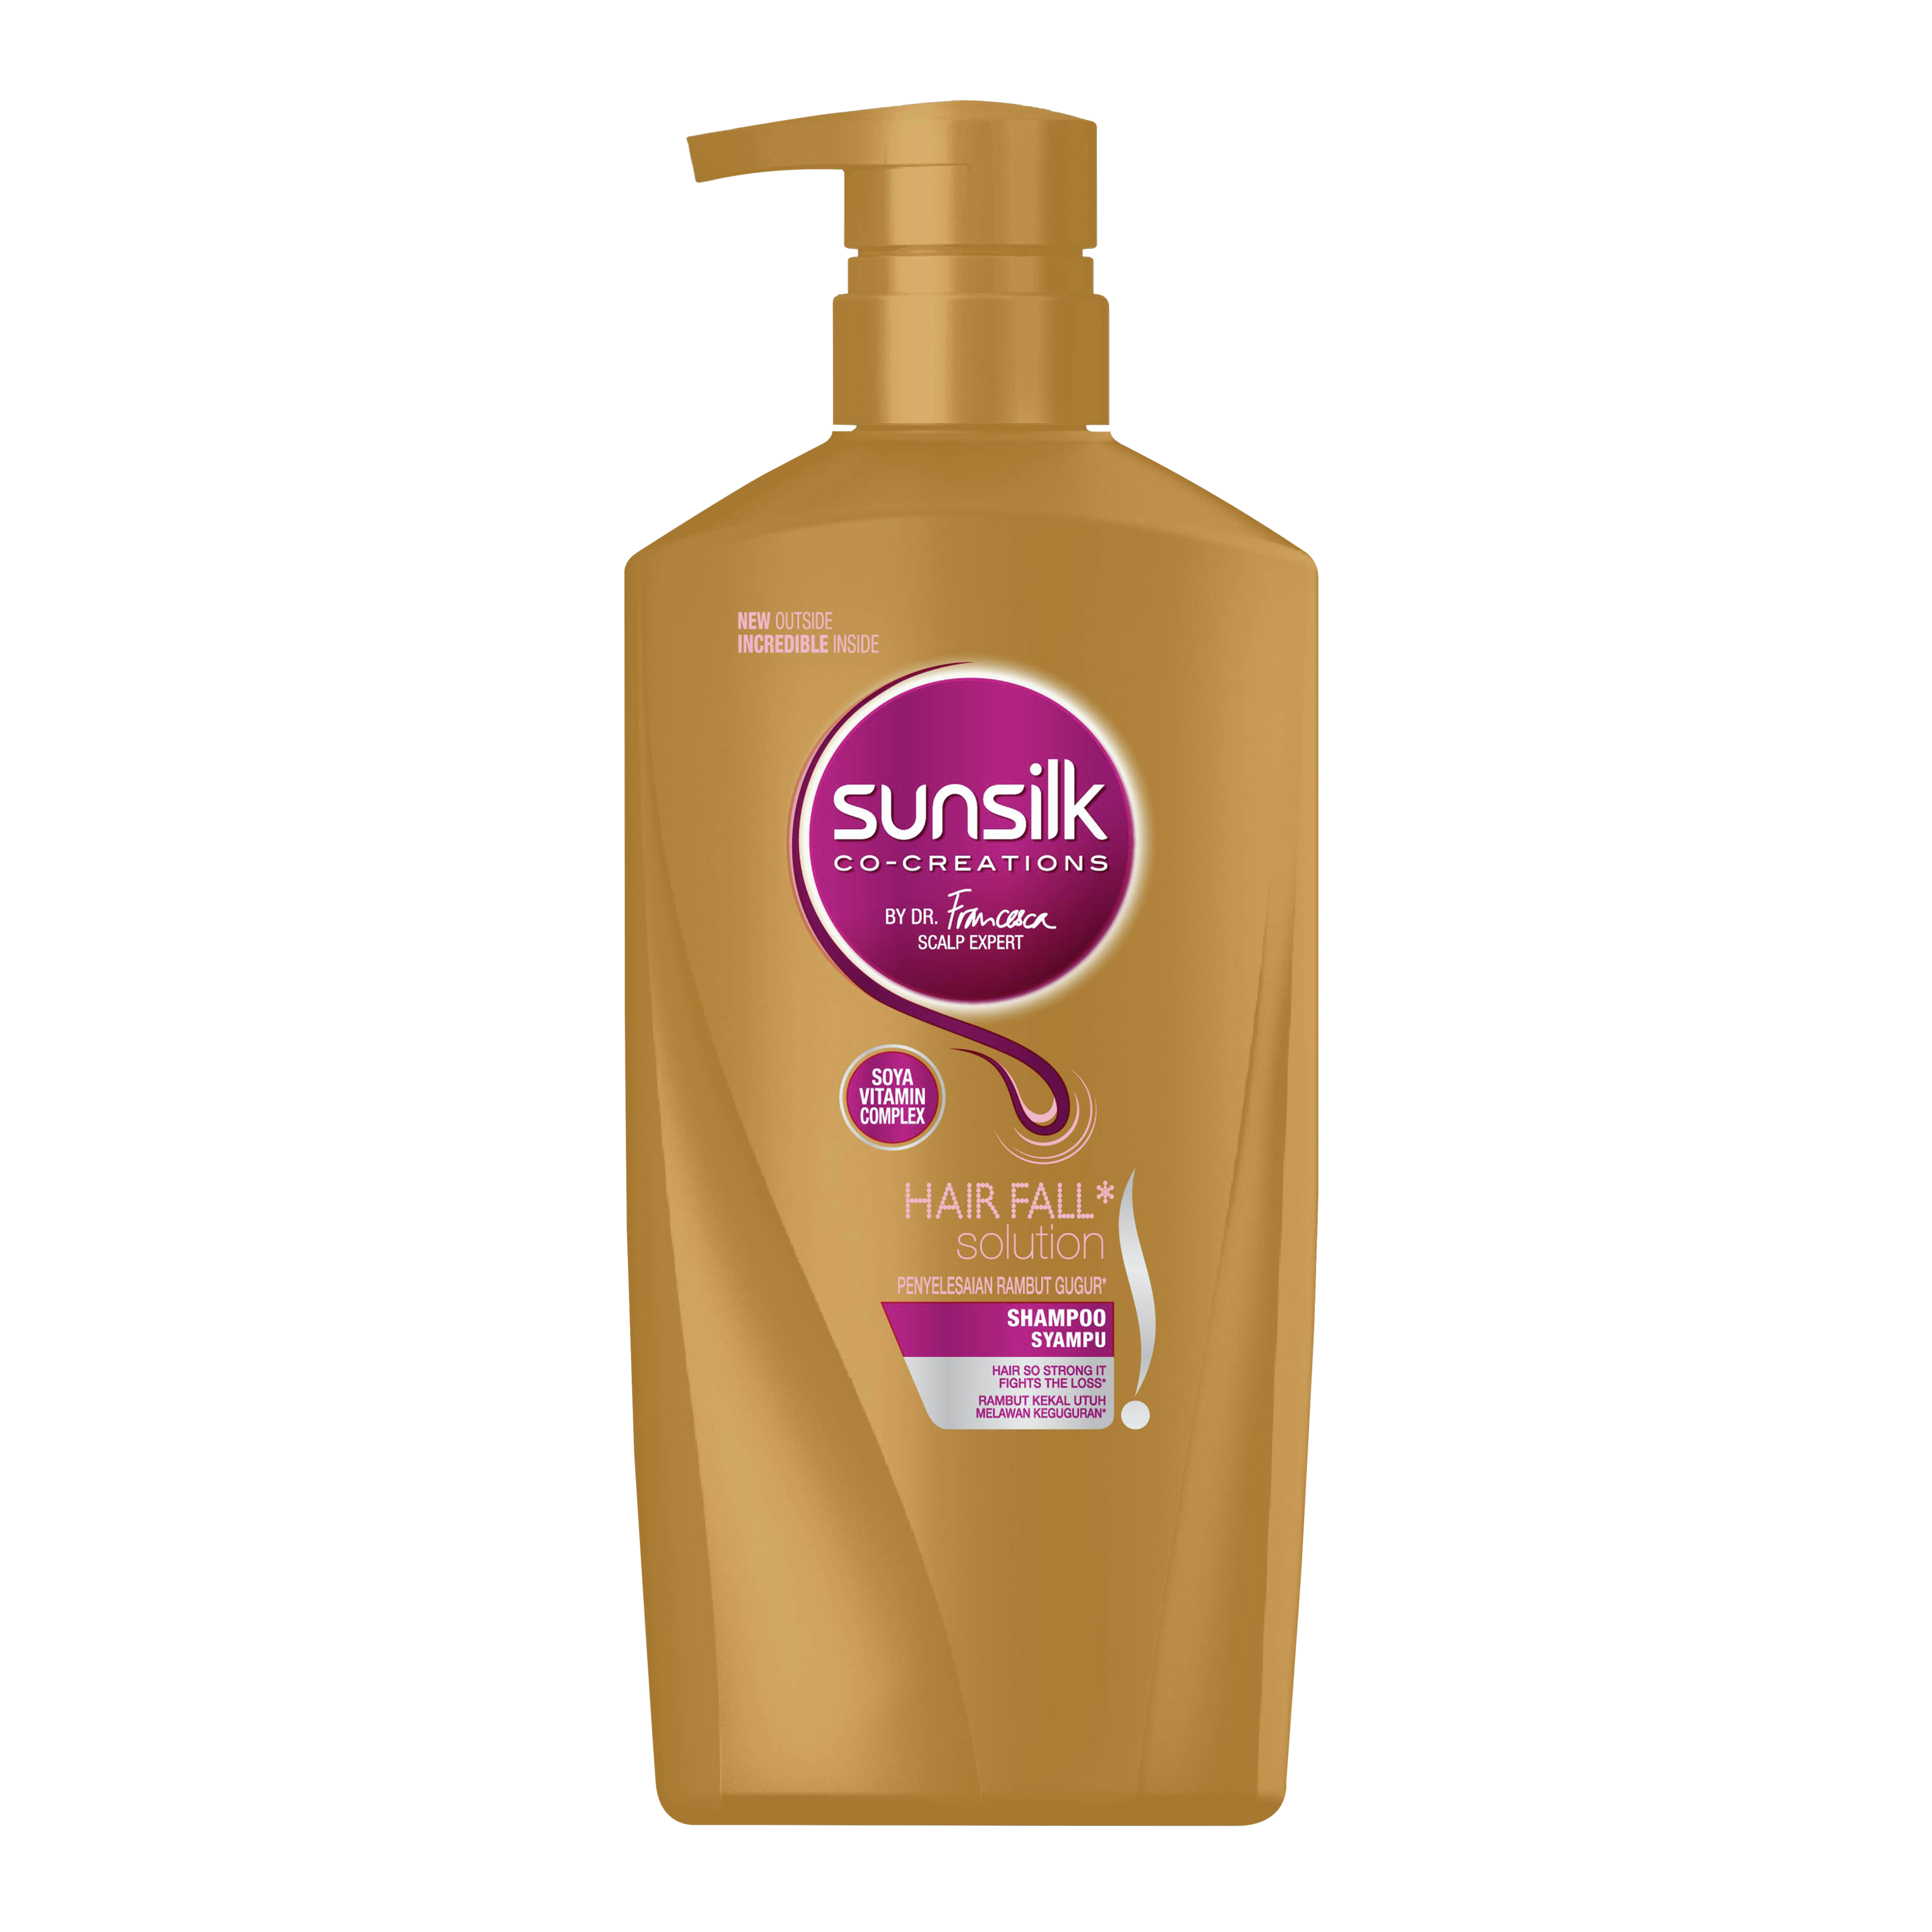 Sunsilk Hair Fall Solution Shampoo 650ml front of pack image